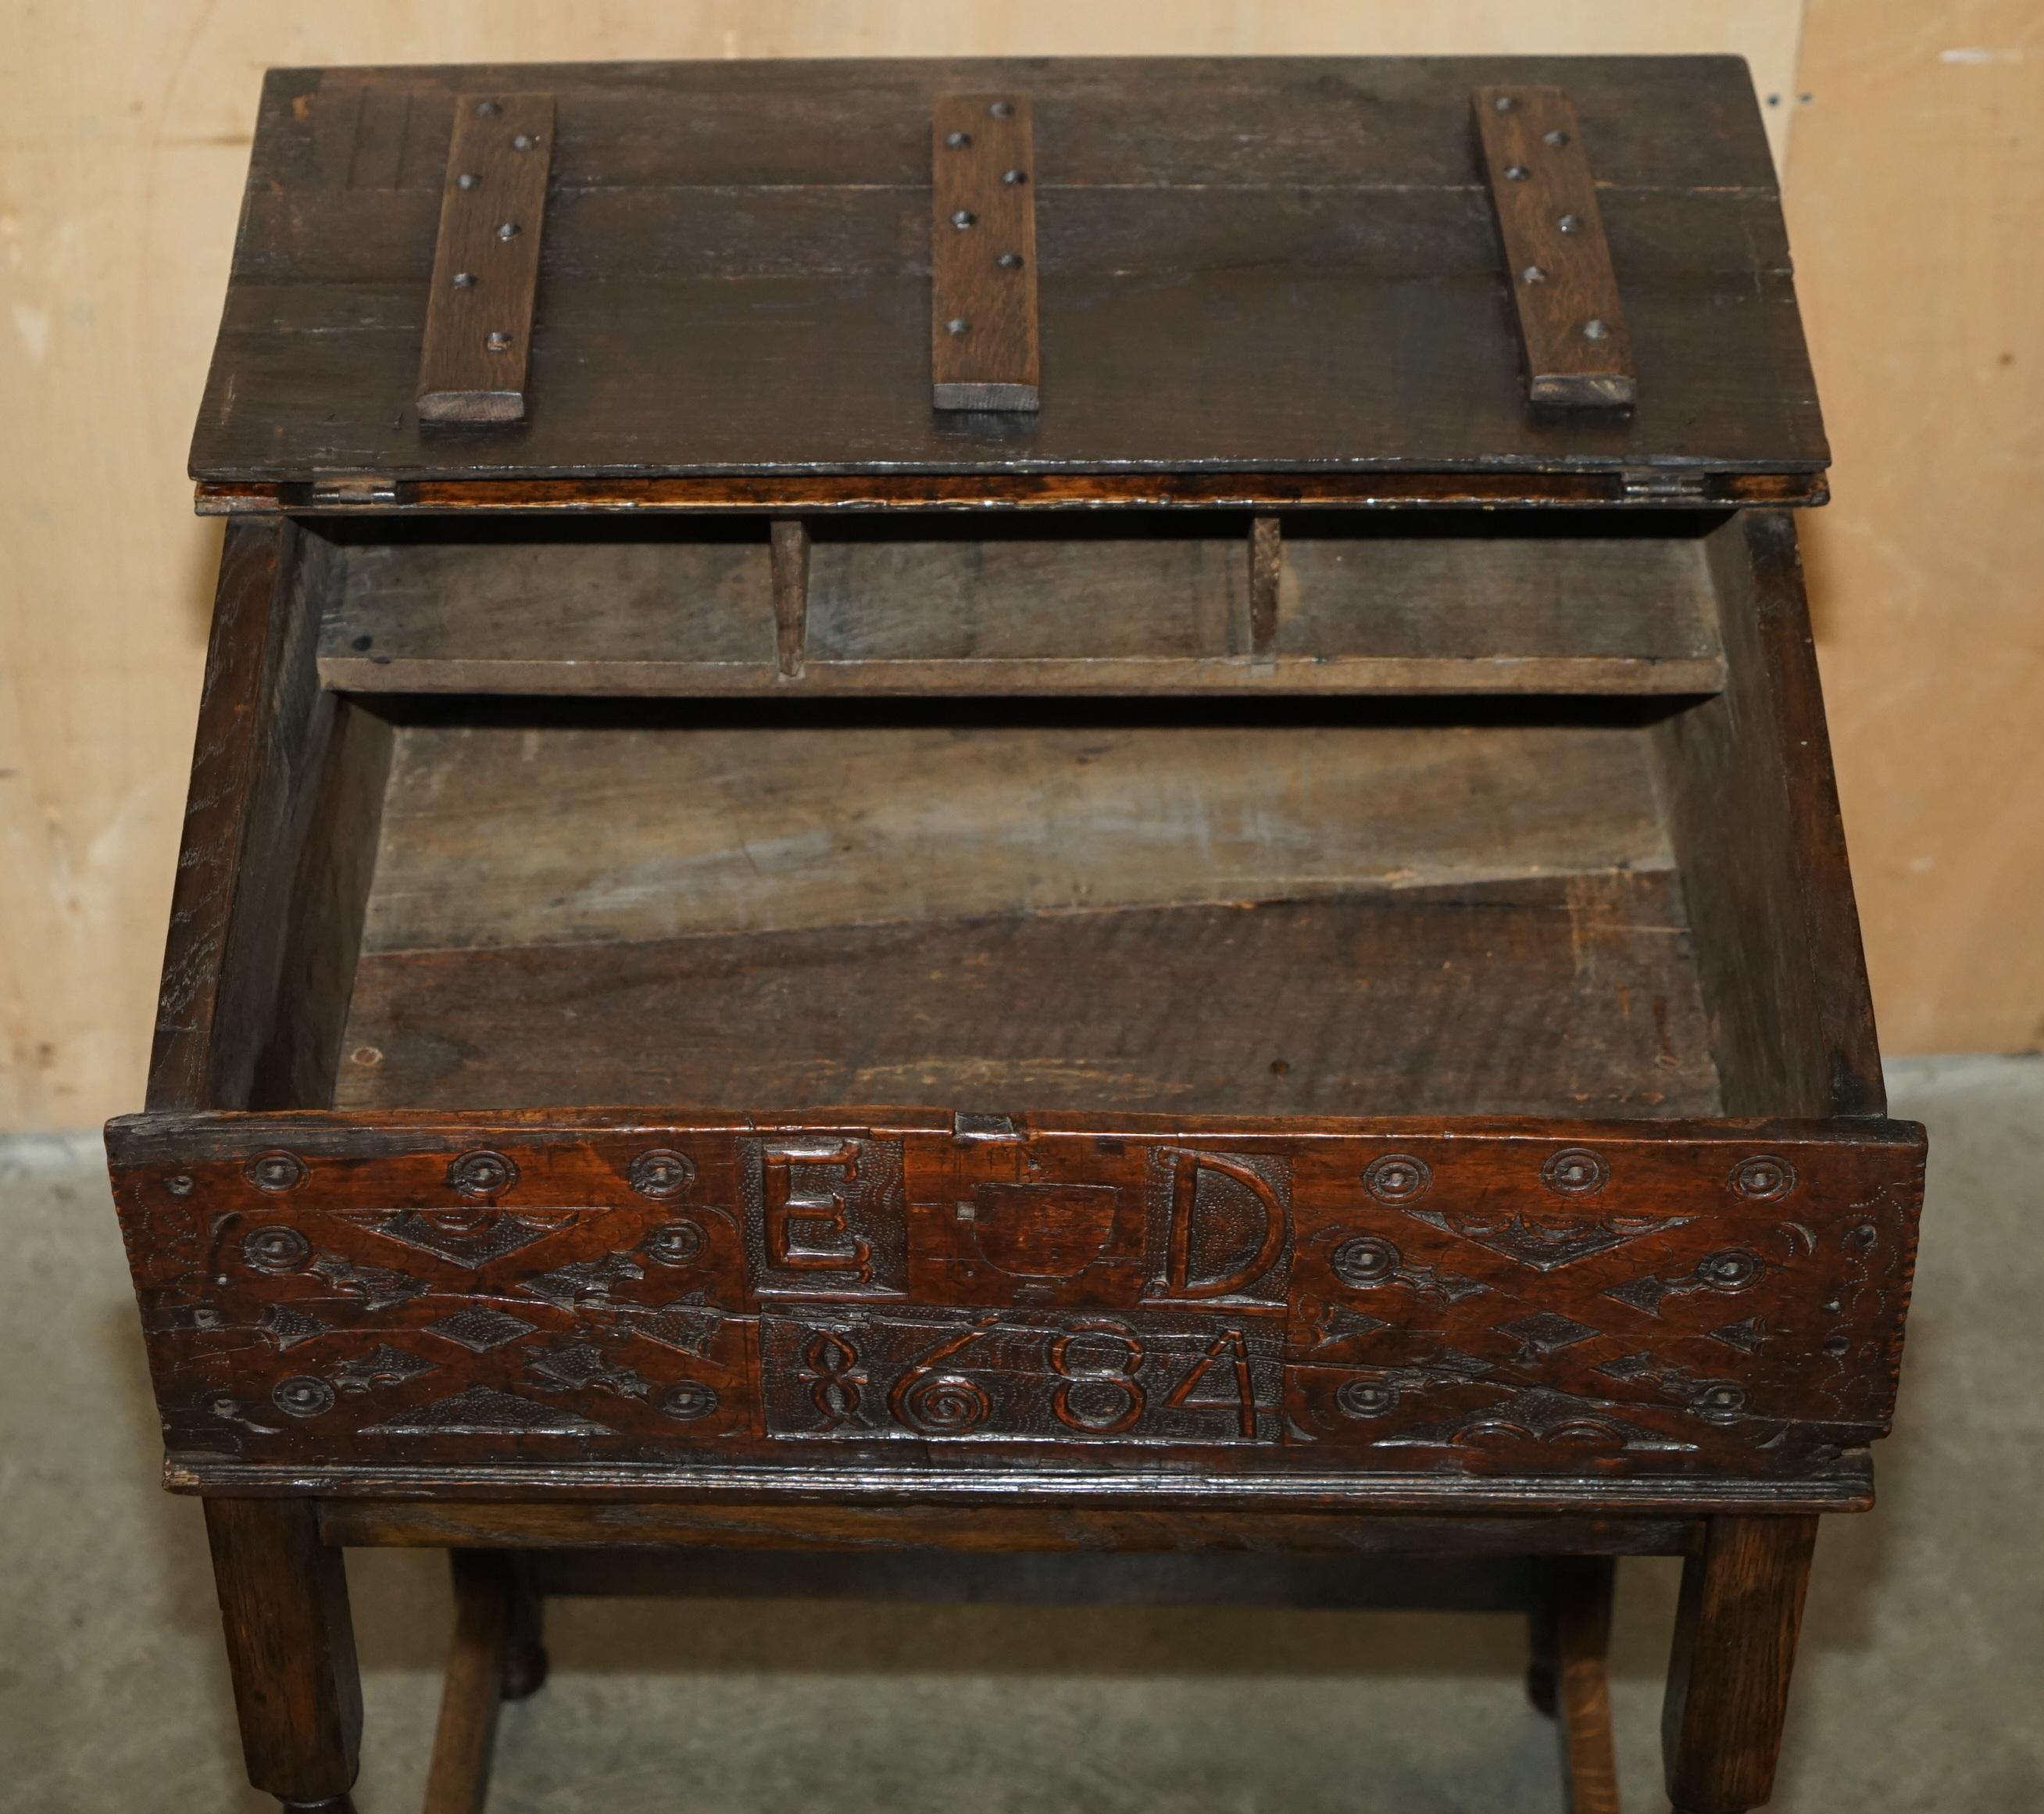 ANTIQUE 1684 DATED HAND CARVED 17TH CENTURY LIFT TOP WRITiNG TABLE DESK BIBLE For Sale 11